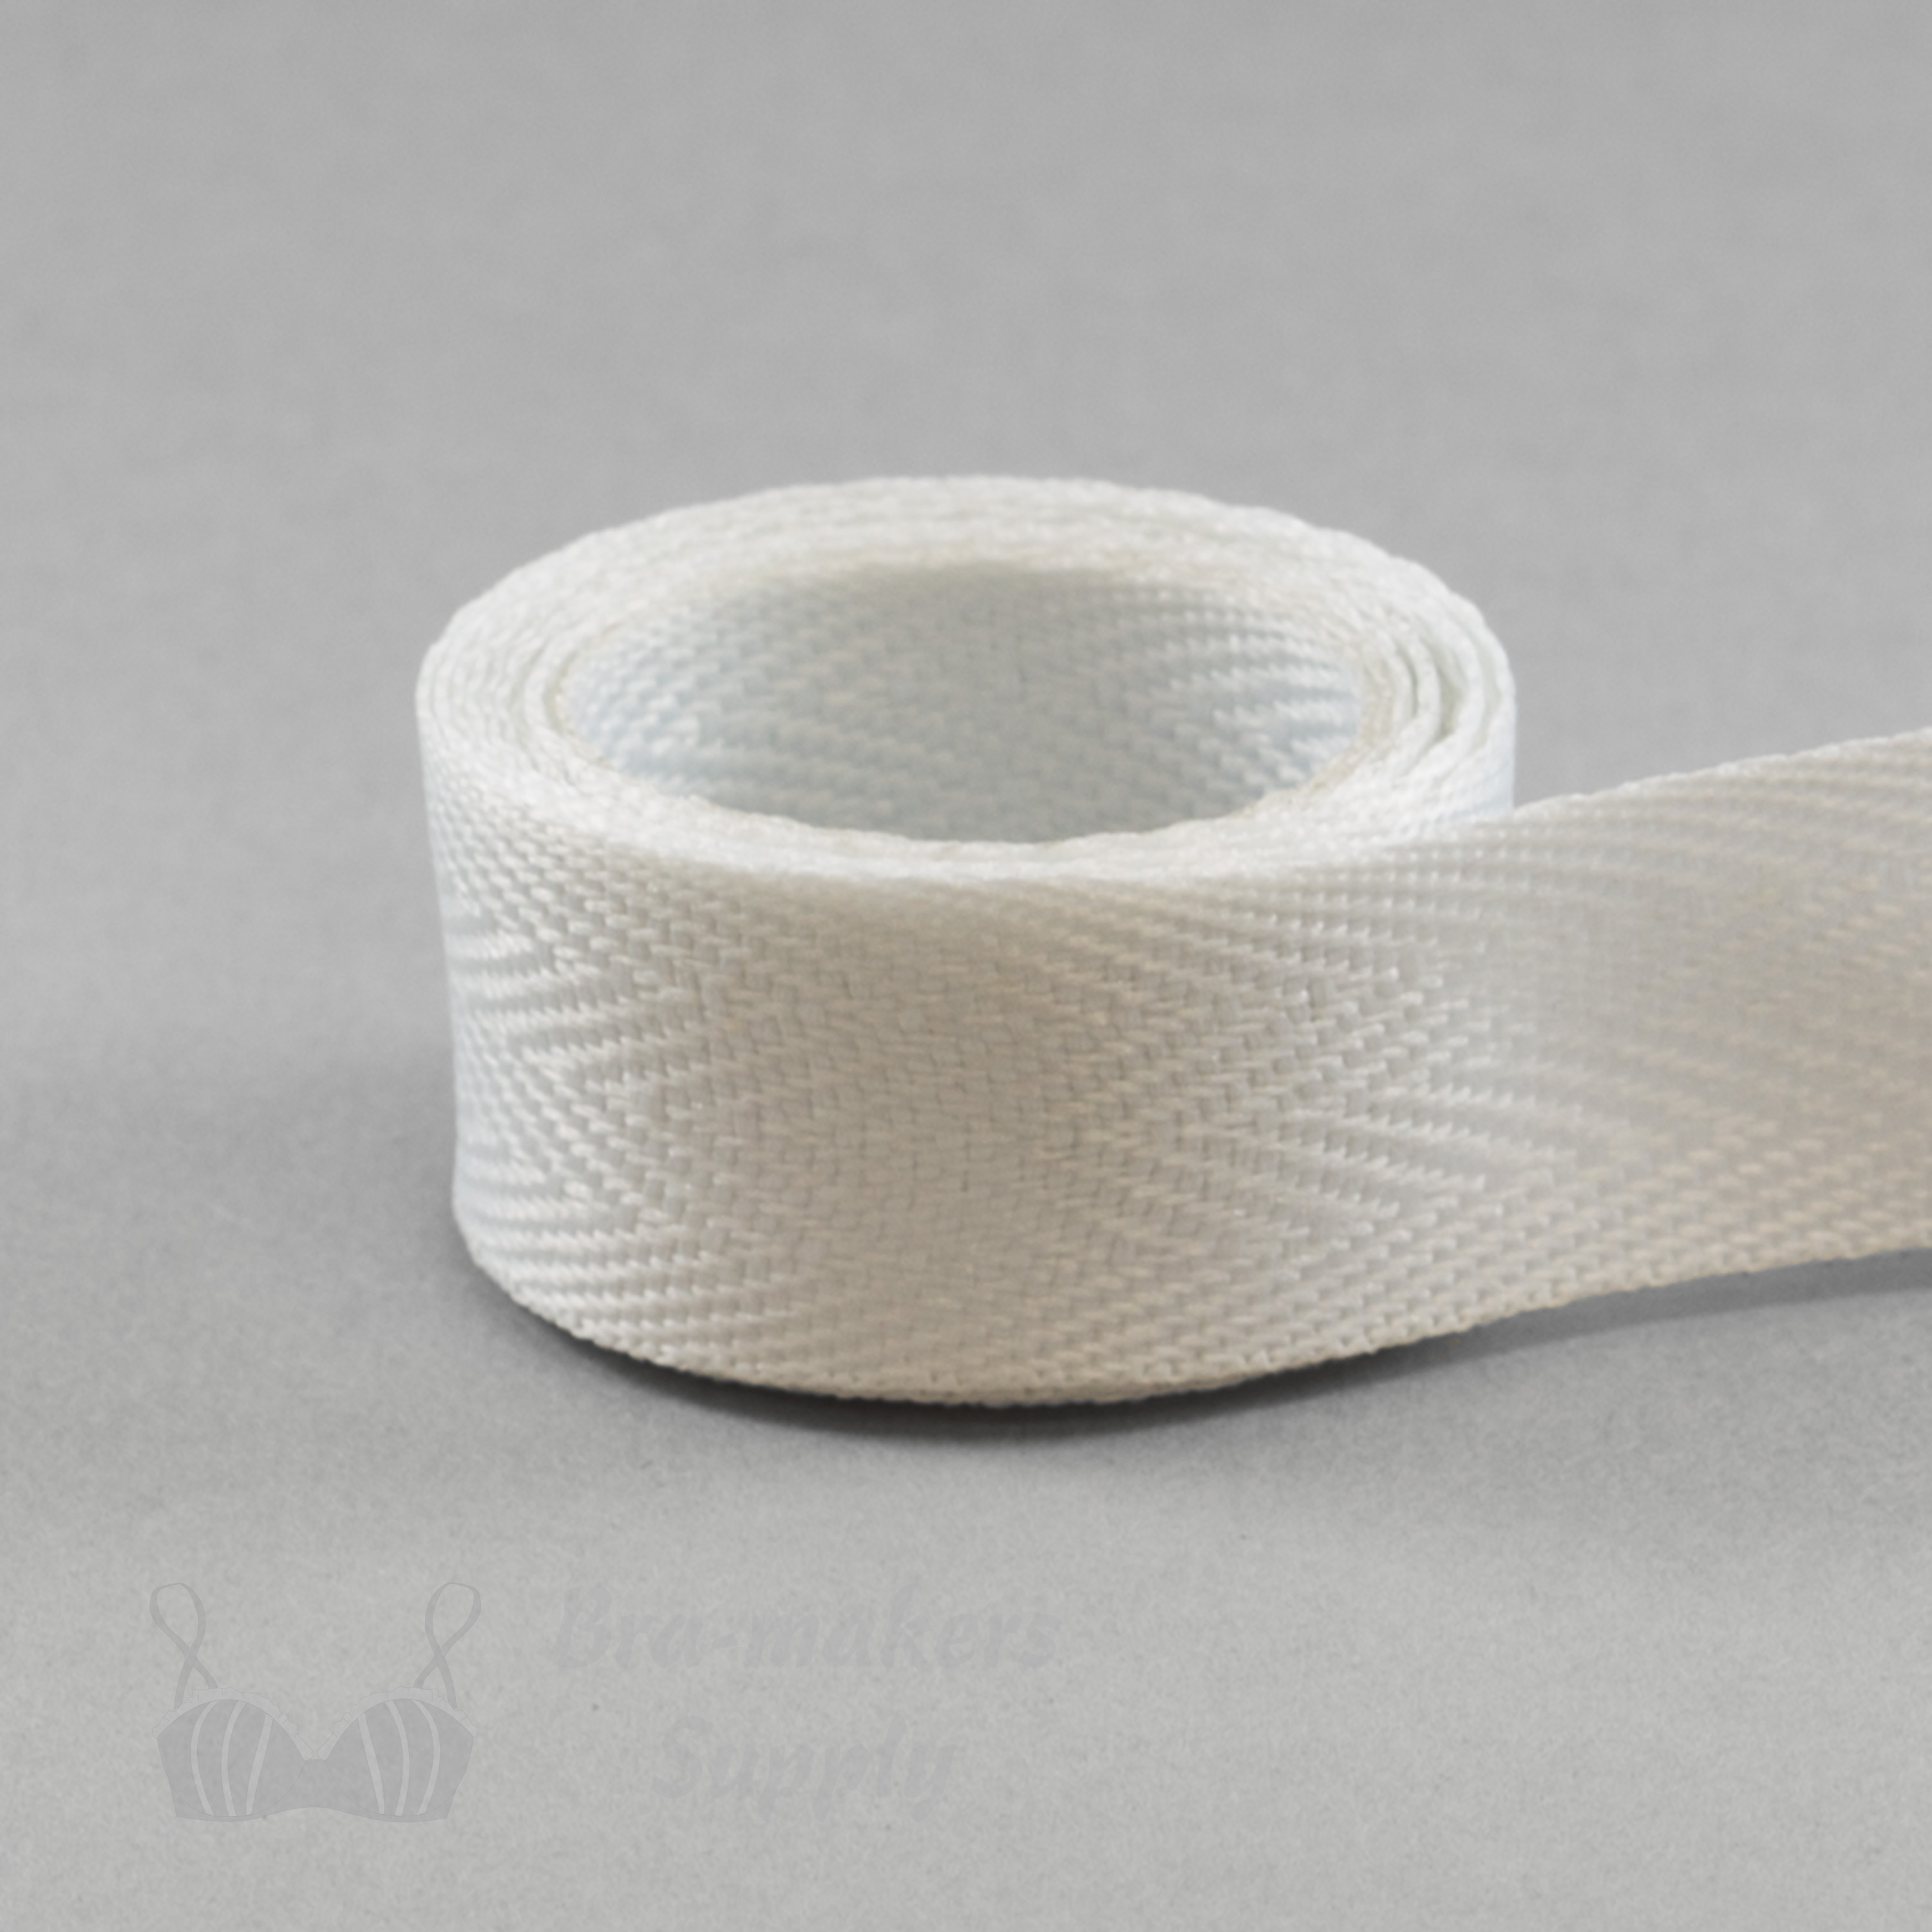 Single Sided Polyester Garment Tape, For Garments, Size: 1 Inch at